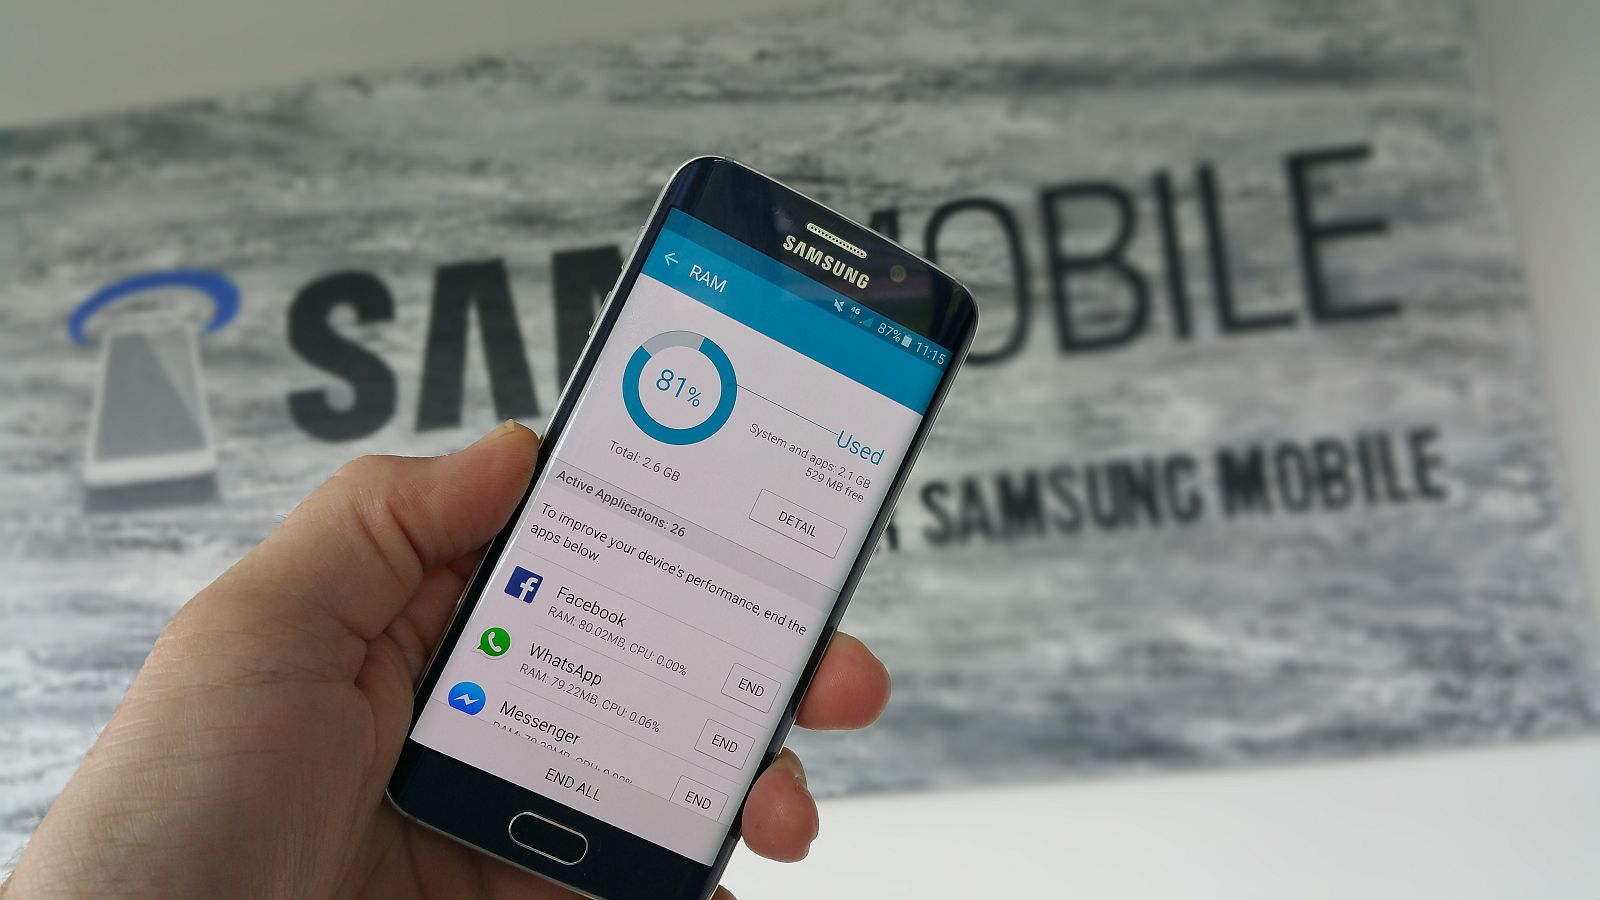 How Much RAM Does A Samsung Galaxy S6 Have